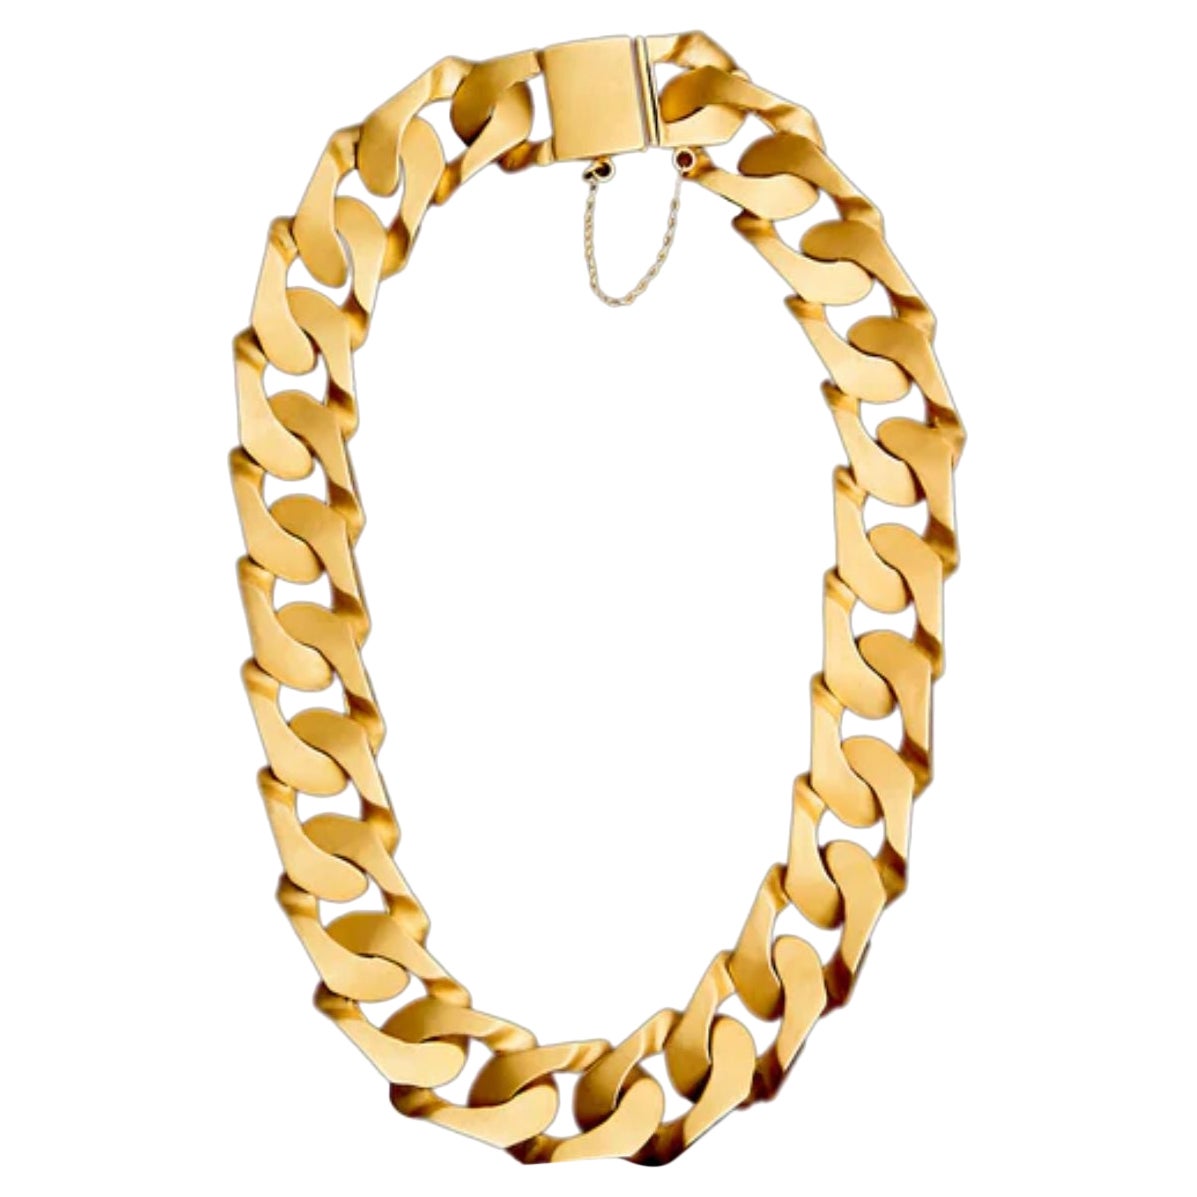 Kuban Chain Necklace in 24K Gold with Satin Finish 